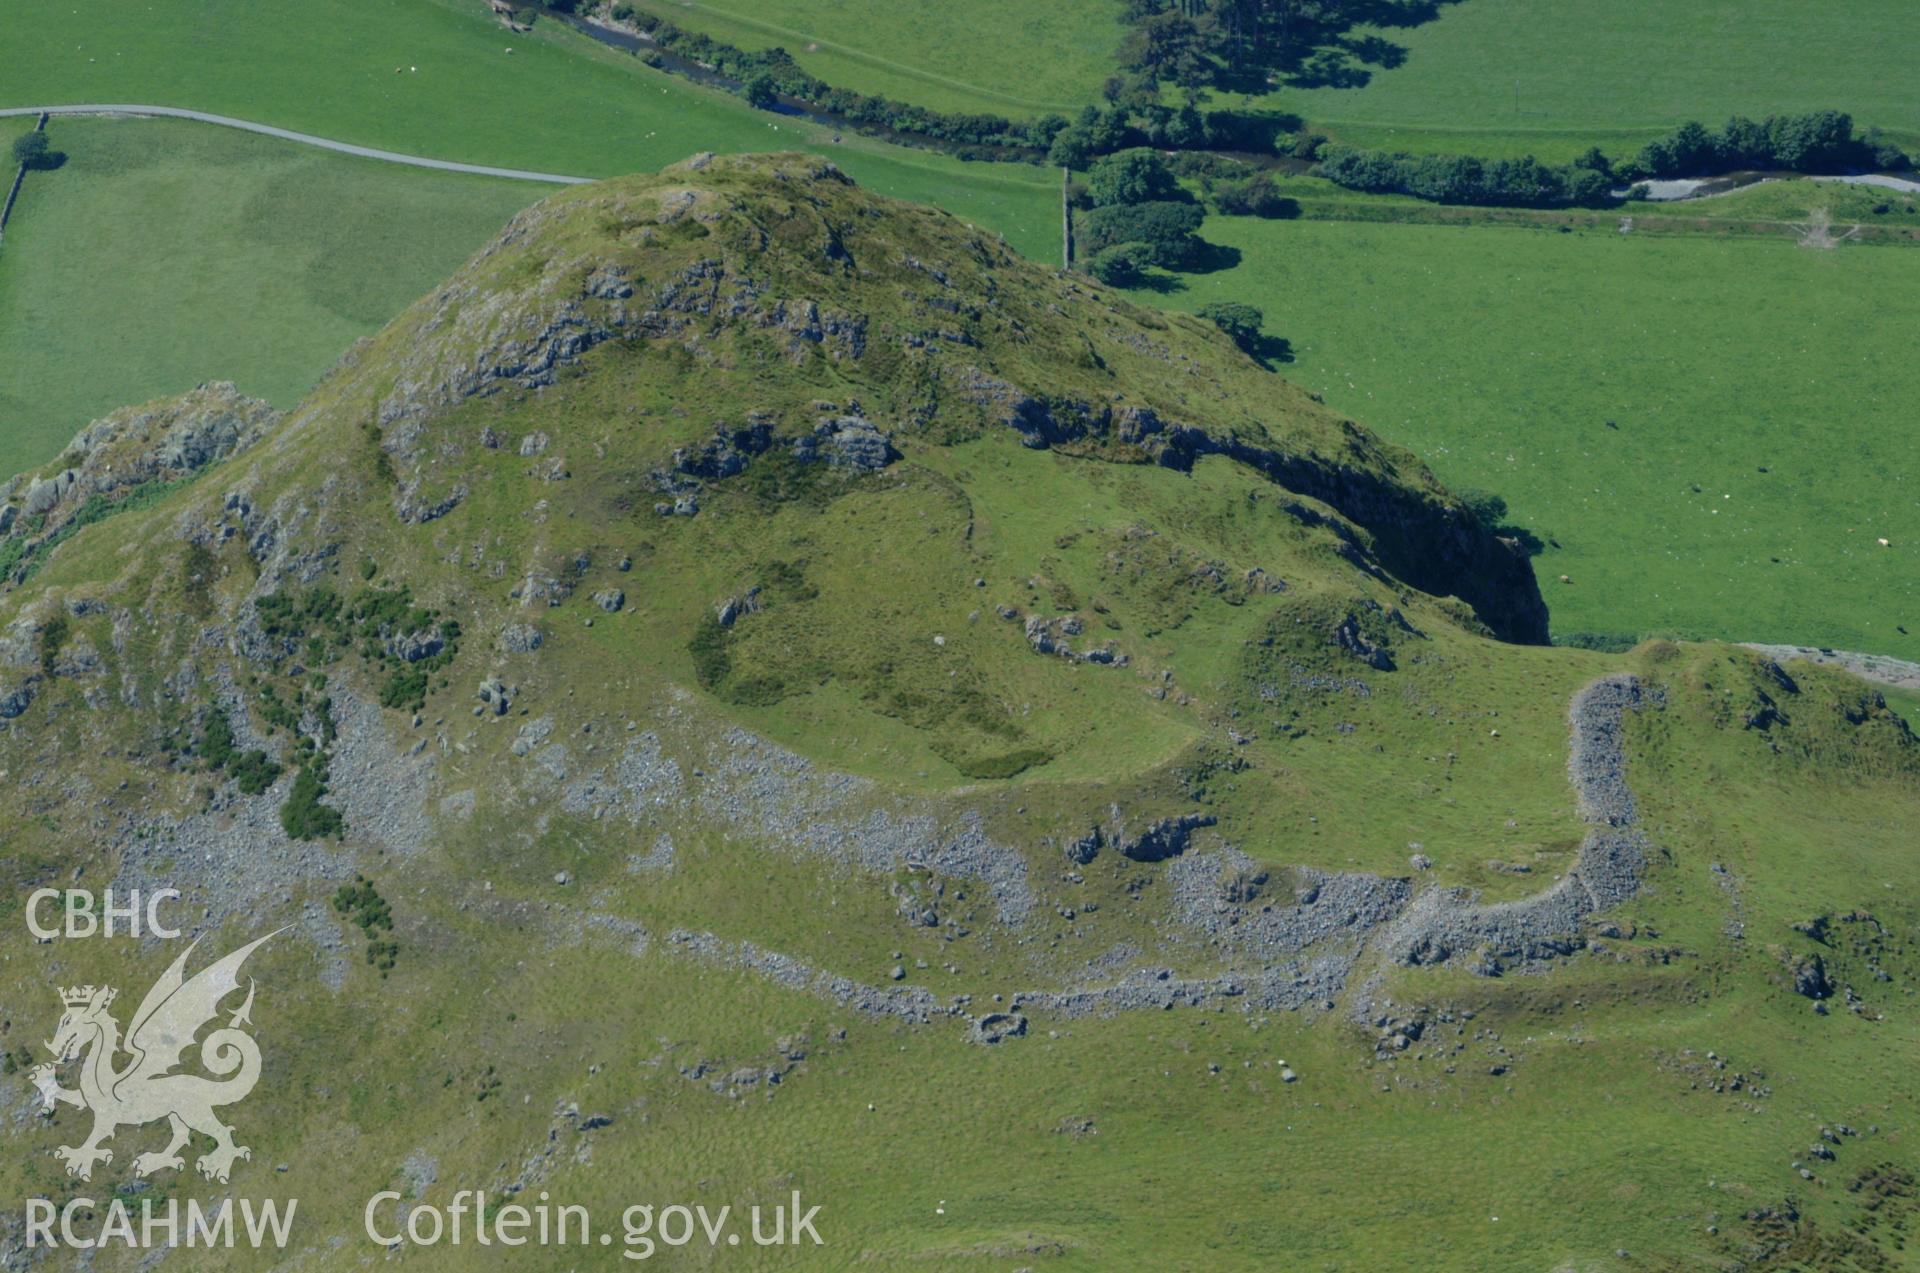 RCAHMW colour oblique aerial photograph of Craig-y-deryn Hillfort taken on 14/06/2004 by Toby Driver